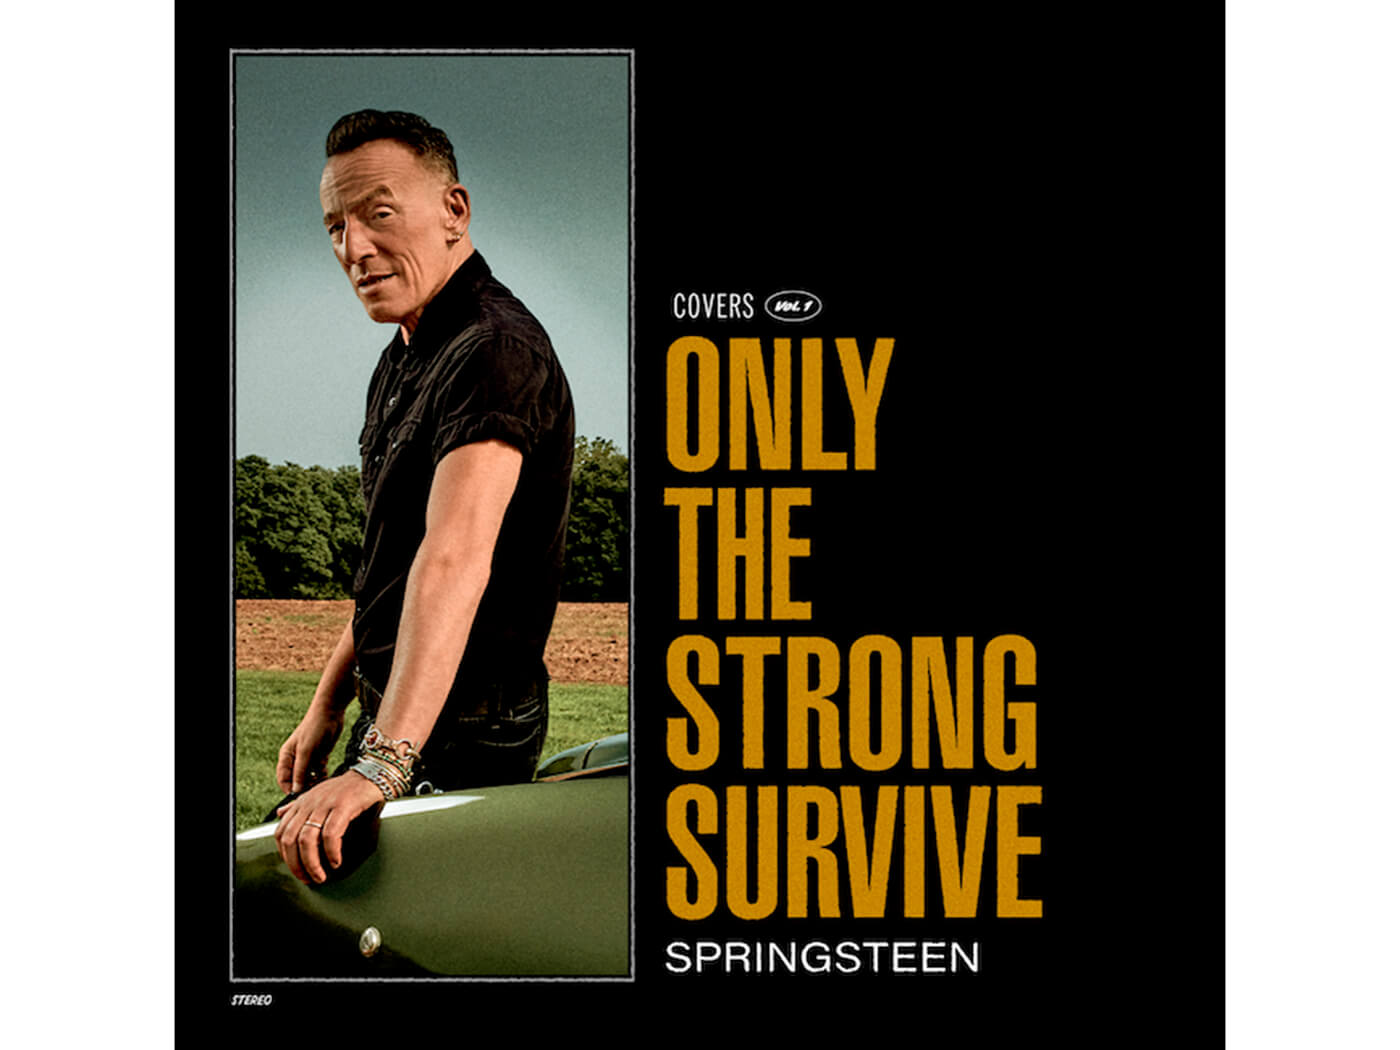 Bruce Springsteen announces new album, Only The Strong Survive